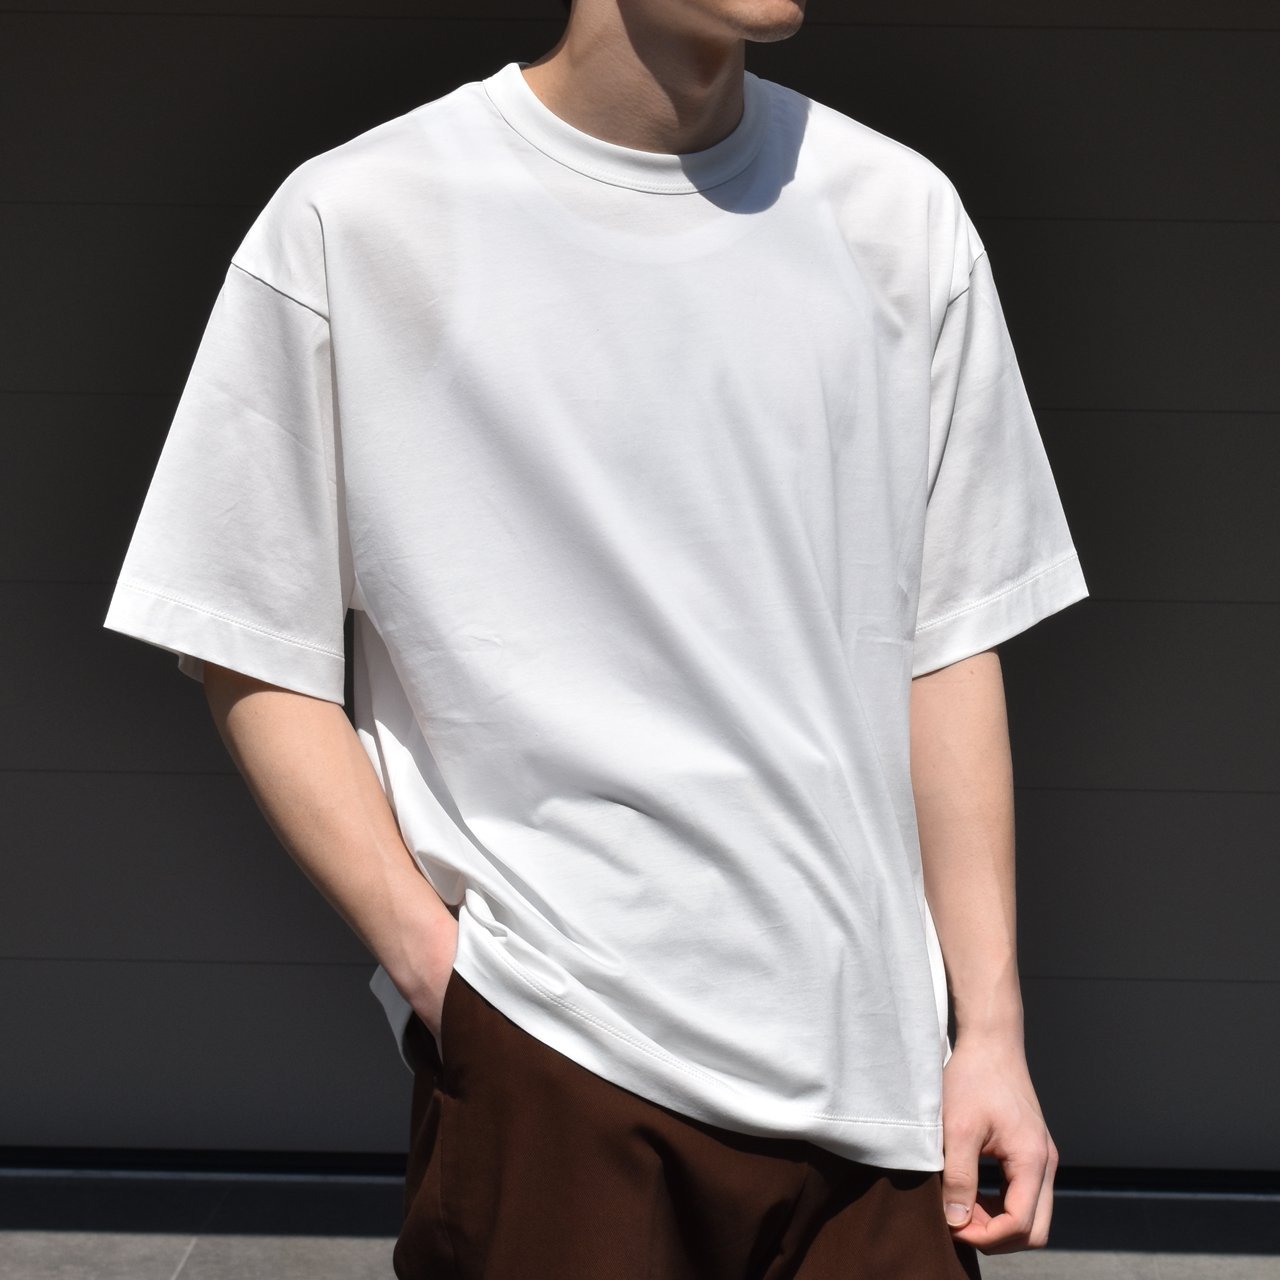 <img class='new_mark_img1' src='https://img.shop-pro.jp/img/new/icons5.gif' style='border:none;display:inline;margin:0px;padding:0px;width:auto;' />MARKAWARE (ޡ)COMFORT FIT Tee WHITE -ORGANIC GIZA 80/2 KNIT-